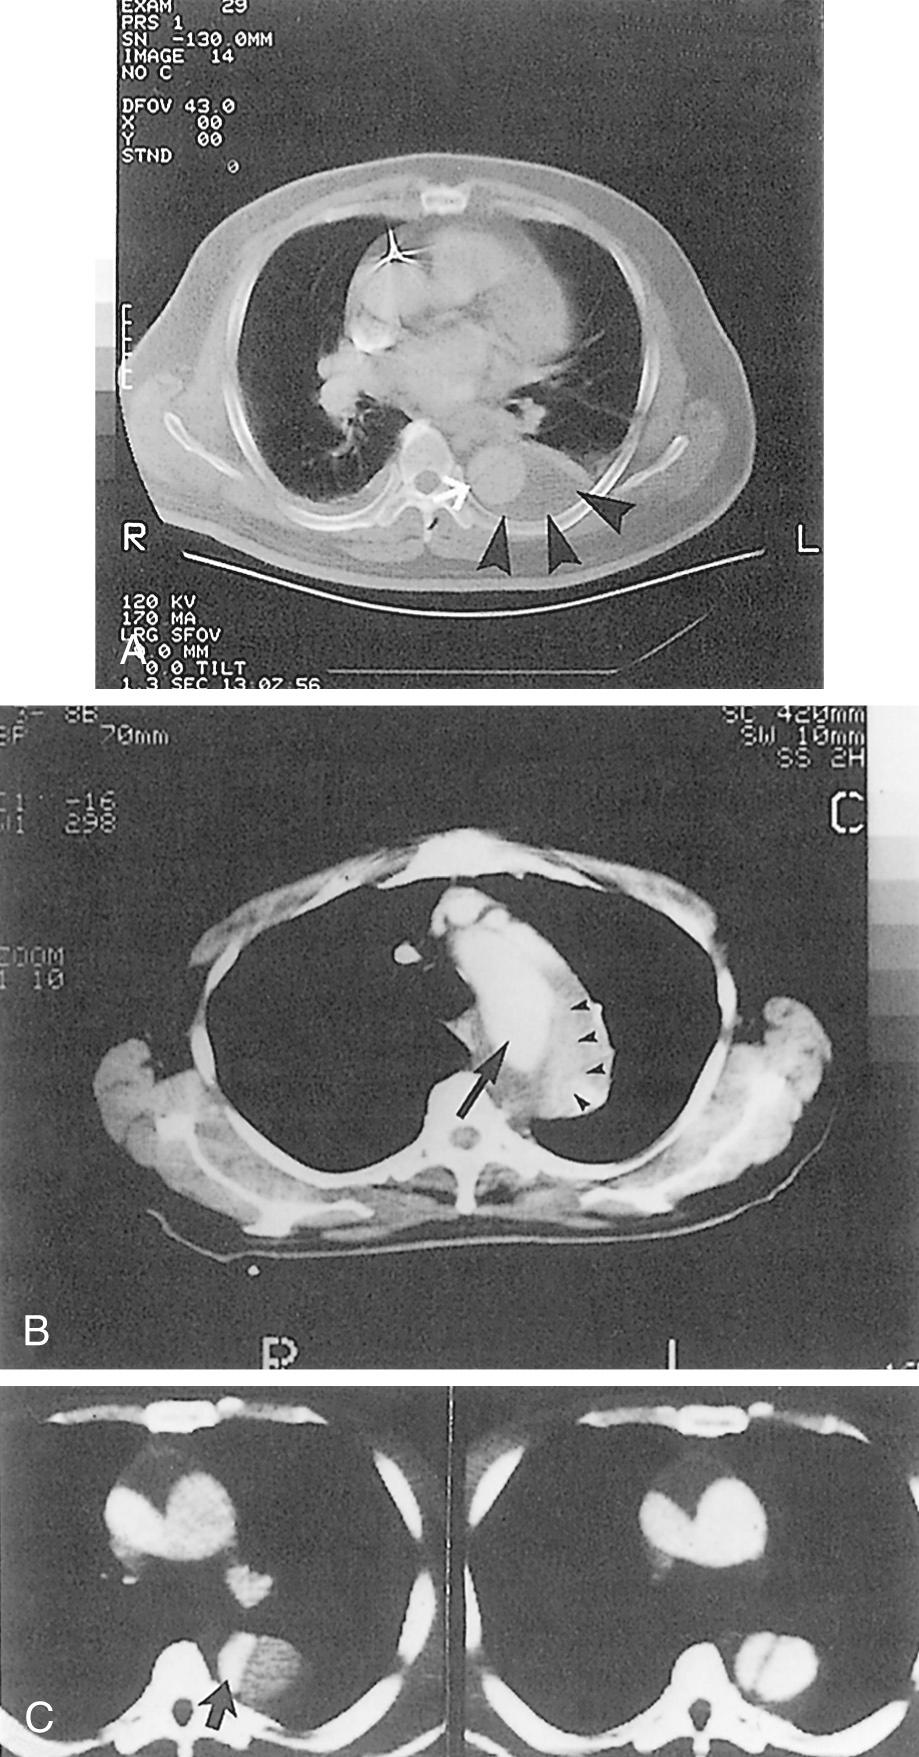 FIGURE 71-2, Examples of diagnostic computed tomography (CT) scans. A, The CT scan shows the linear flap (black lucency, white arrow) between the two aortic lumens in the descending thoracic aorta that is characteristic of aortic dissection. In addition, a relatively large hematoma surrounding the aorta is seen (arrowheads), representing recent hemorrhage contained in the posterior mediastinum. Despite this ominous appearance, this patient did well with medical therapy for more than 1 year until progressive enlargement of a localized false aneurysm prompted referral for operation. B, CT scan from a different patient with an acute type B dissection illustrating a false aneurysm involving the distal arch and proximal descending thoracic aorta. The false lumen (arrowheads) is partially thrombosed; therefore, it opacifies only faintly compared with the contrast seen in the true lumen (arrow). C, Although this patient had a type A dissection (note the deformed true lumen in the large ascending aorta), this CT scan demonstrates differential opacification of the true and false lumens in the descending thoracic aorta. The true lumen (arrow) is completely opacified in the left panel; later in the cardiac cycle (right panel), both true and false lumens are equally opacified.